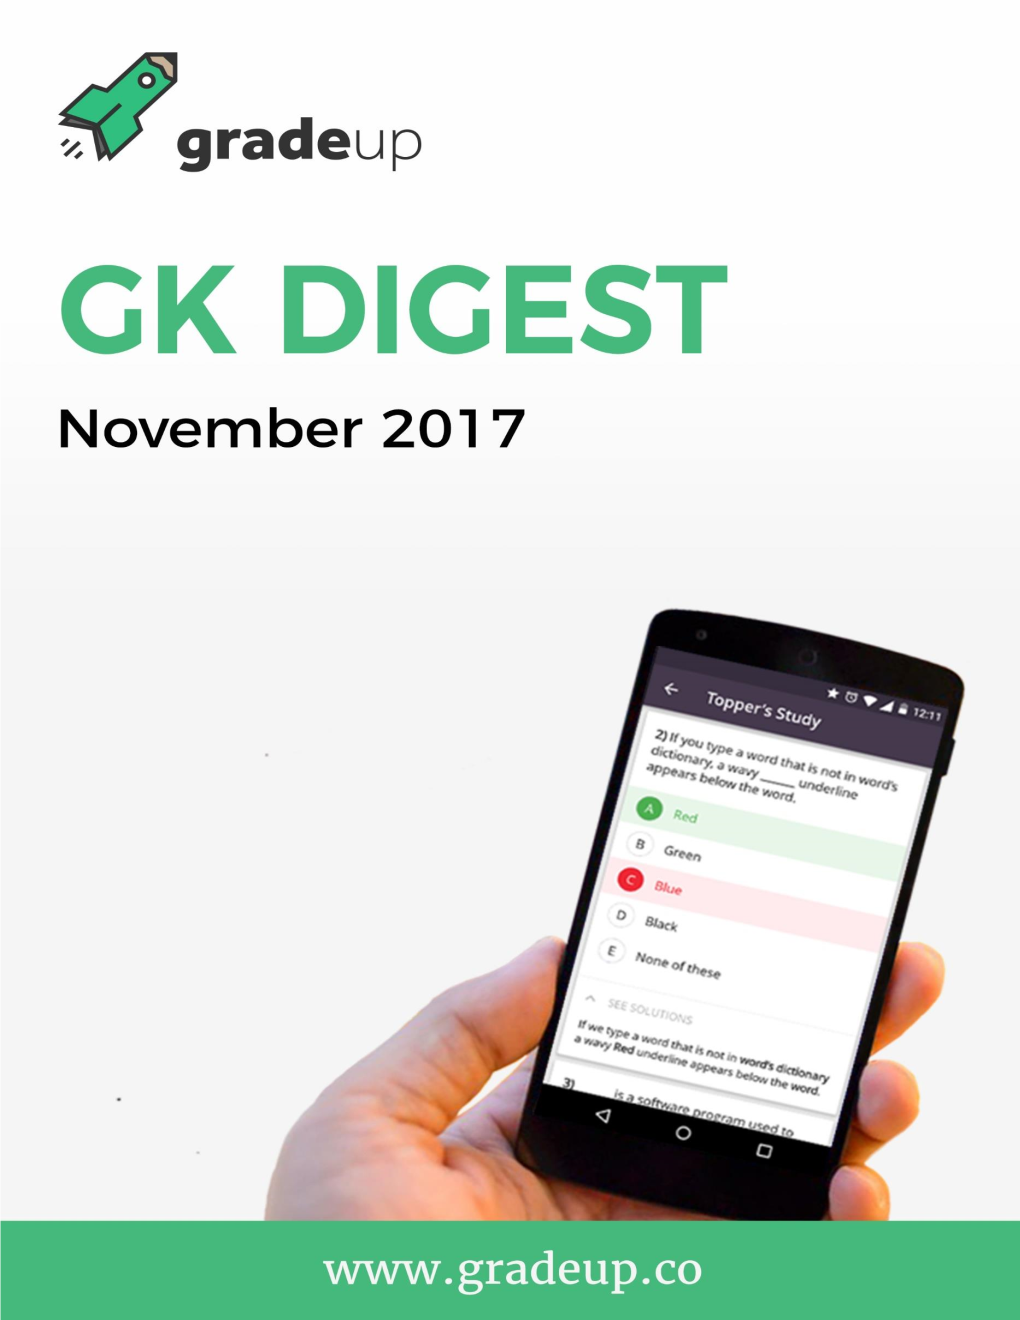 Monthly GK Digest Is a Complete Docket of Important News and Events That Occurred in a Month of November 2017